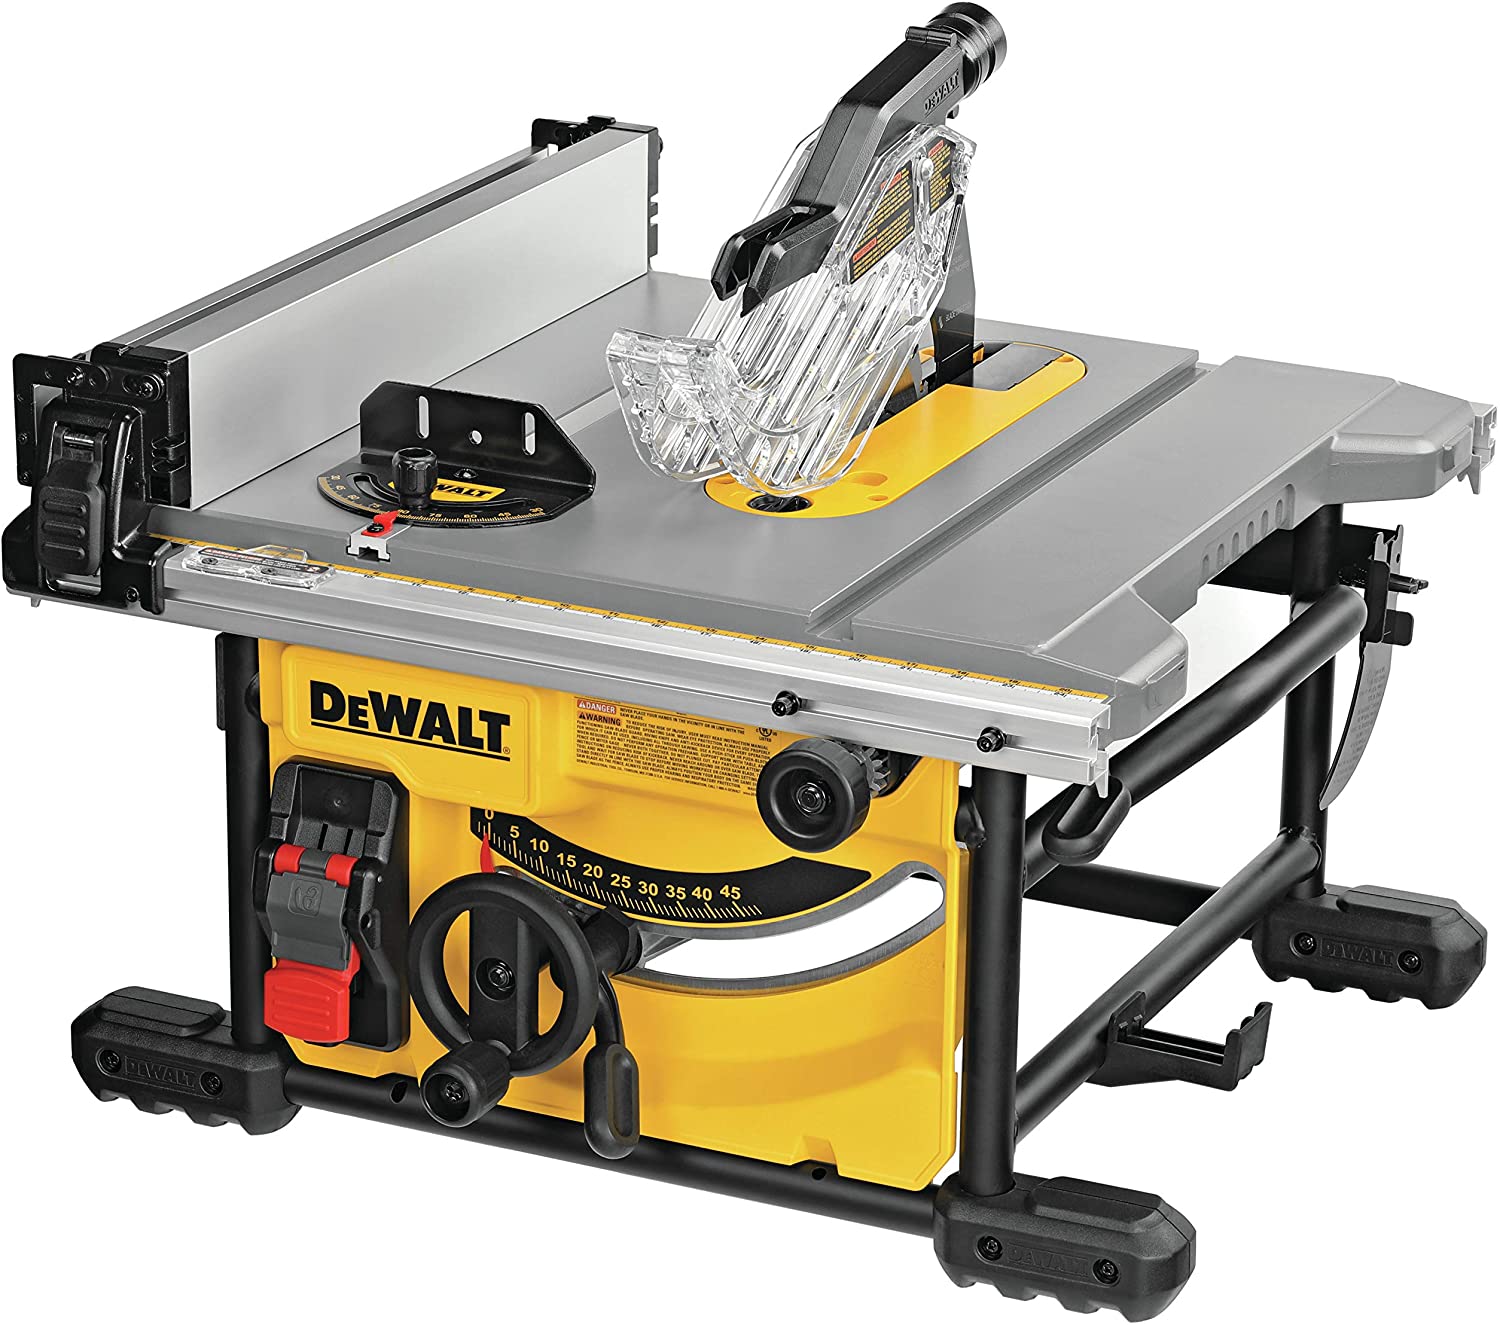 Best jobsite table saw for woodworking